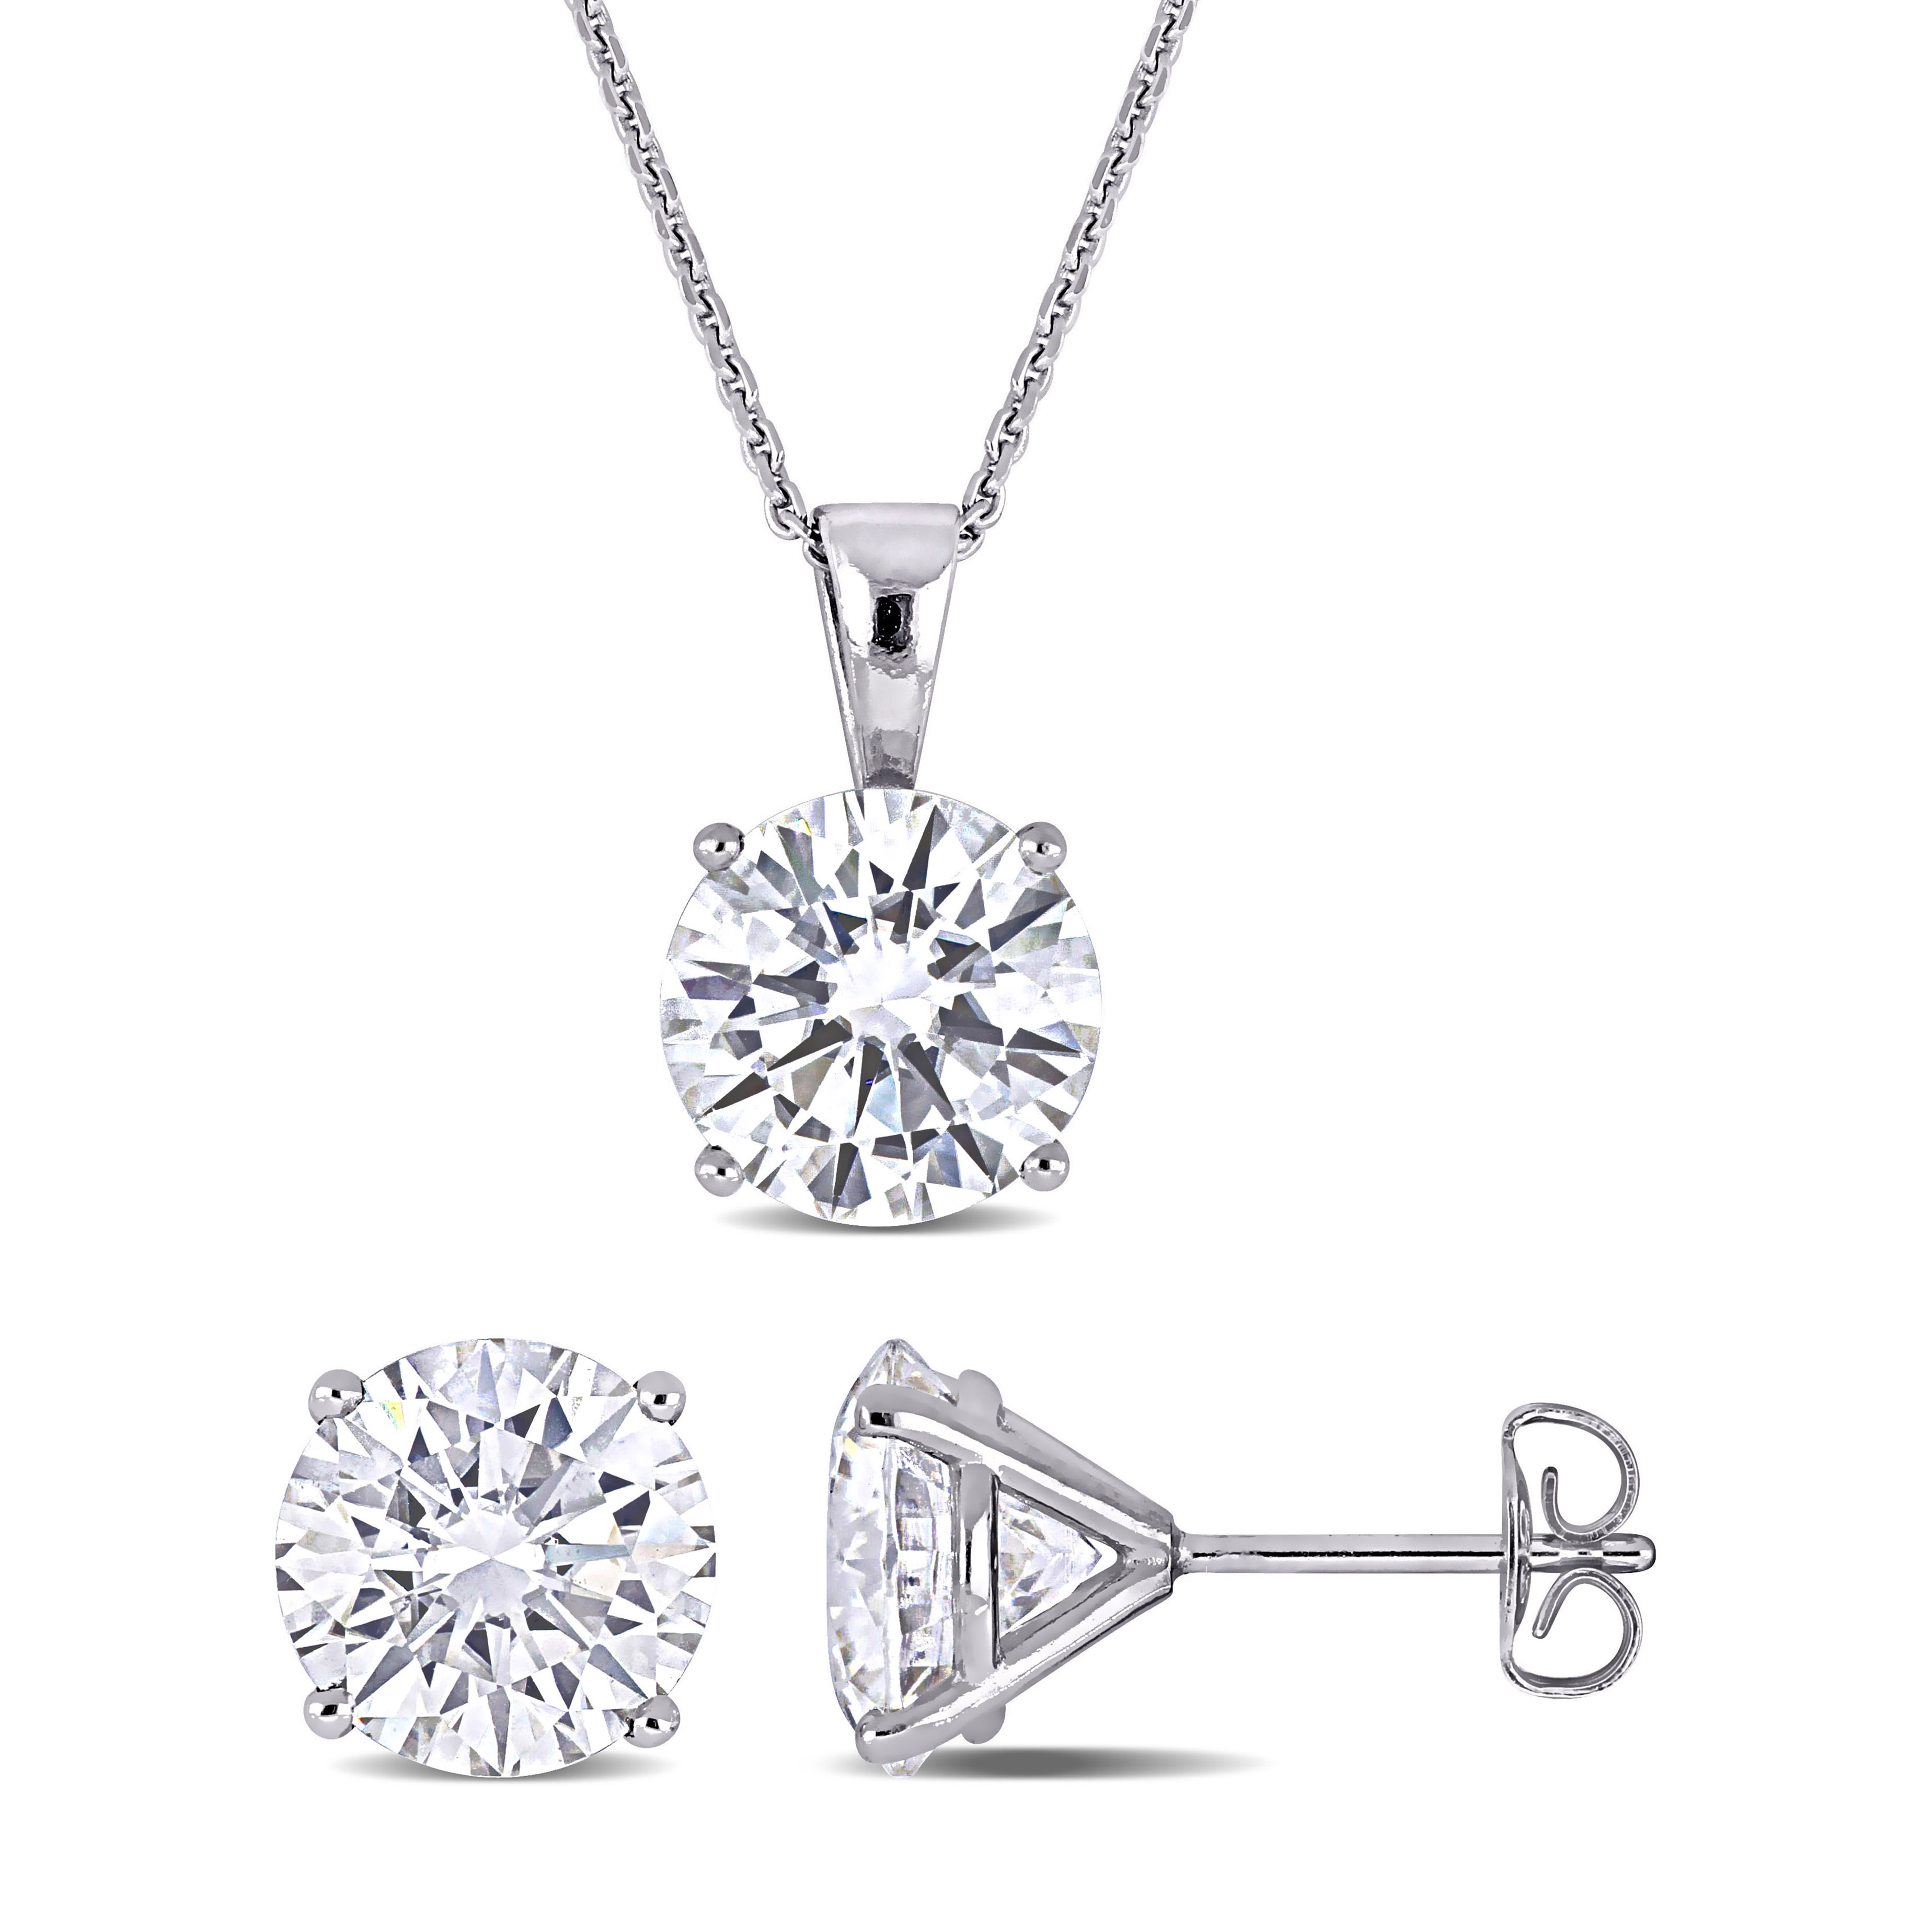 6 CT TGW Moissanite Solitaire Pendant with Chain and Stud Earrings 2-Piece Set in 14k White Gold